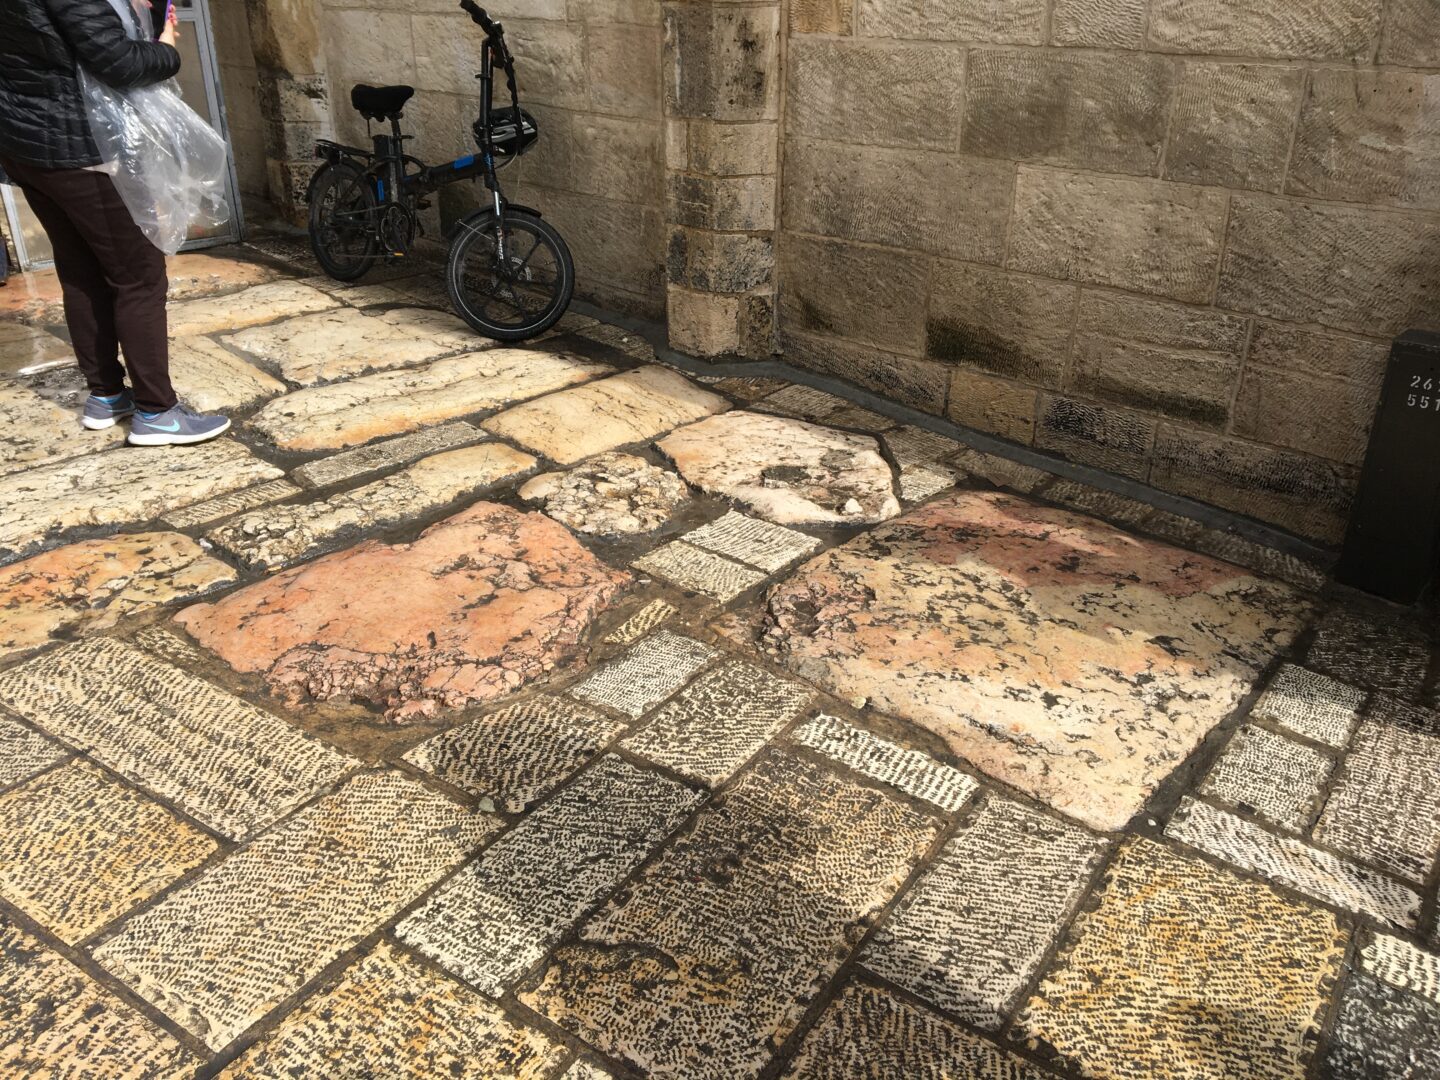 "The Pavement" in the Old City of Jerusalem